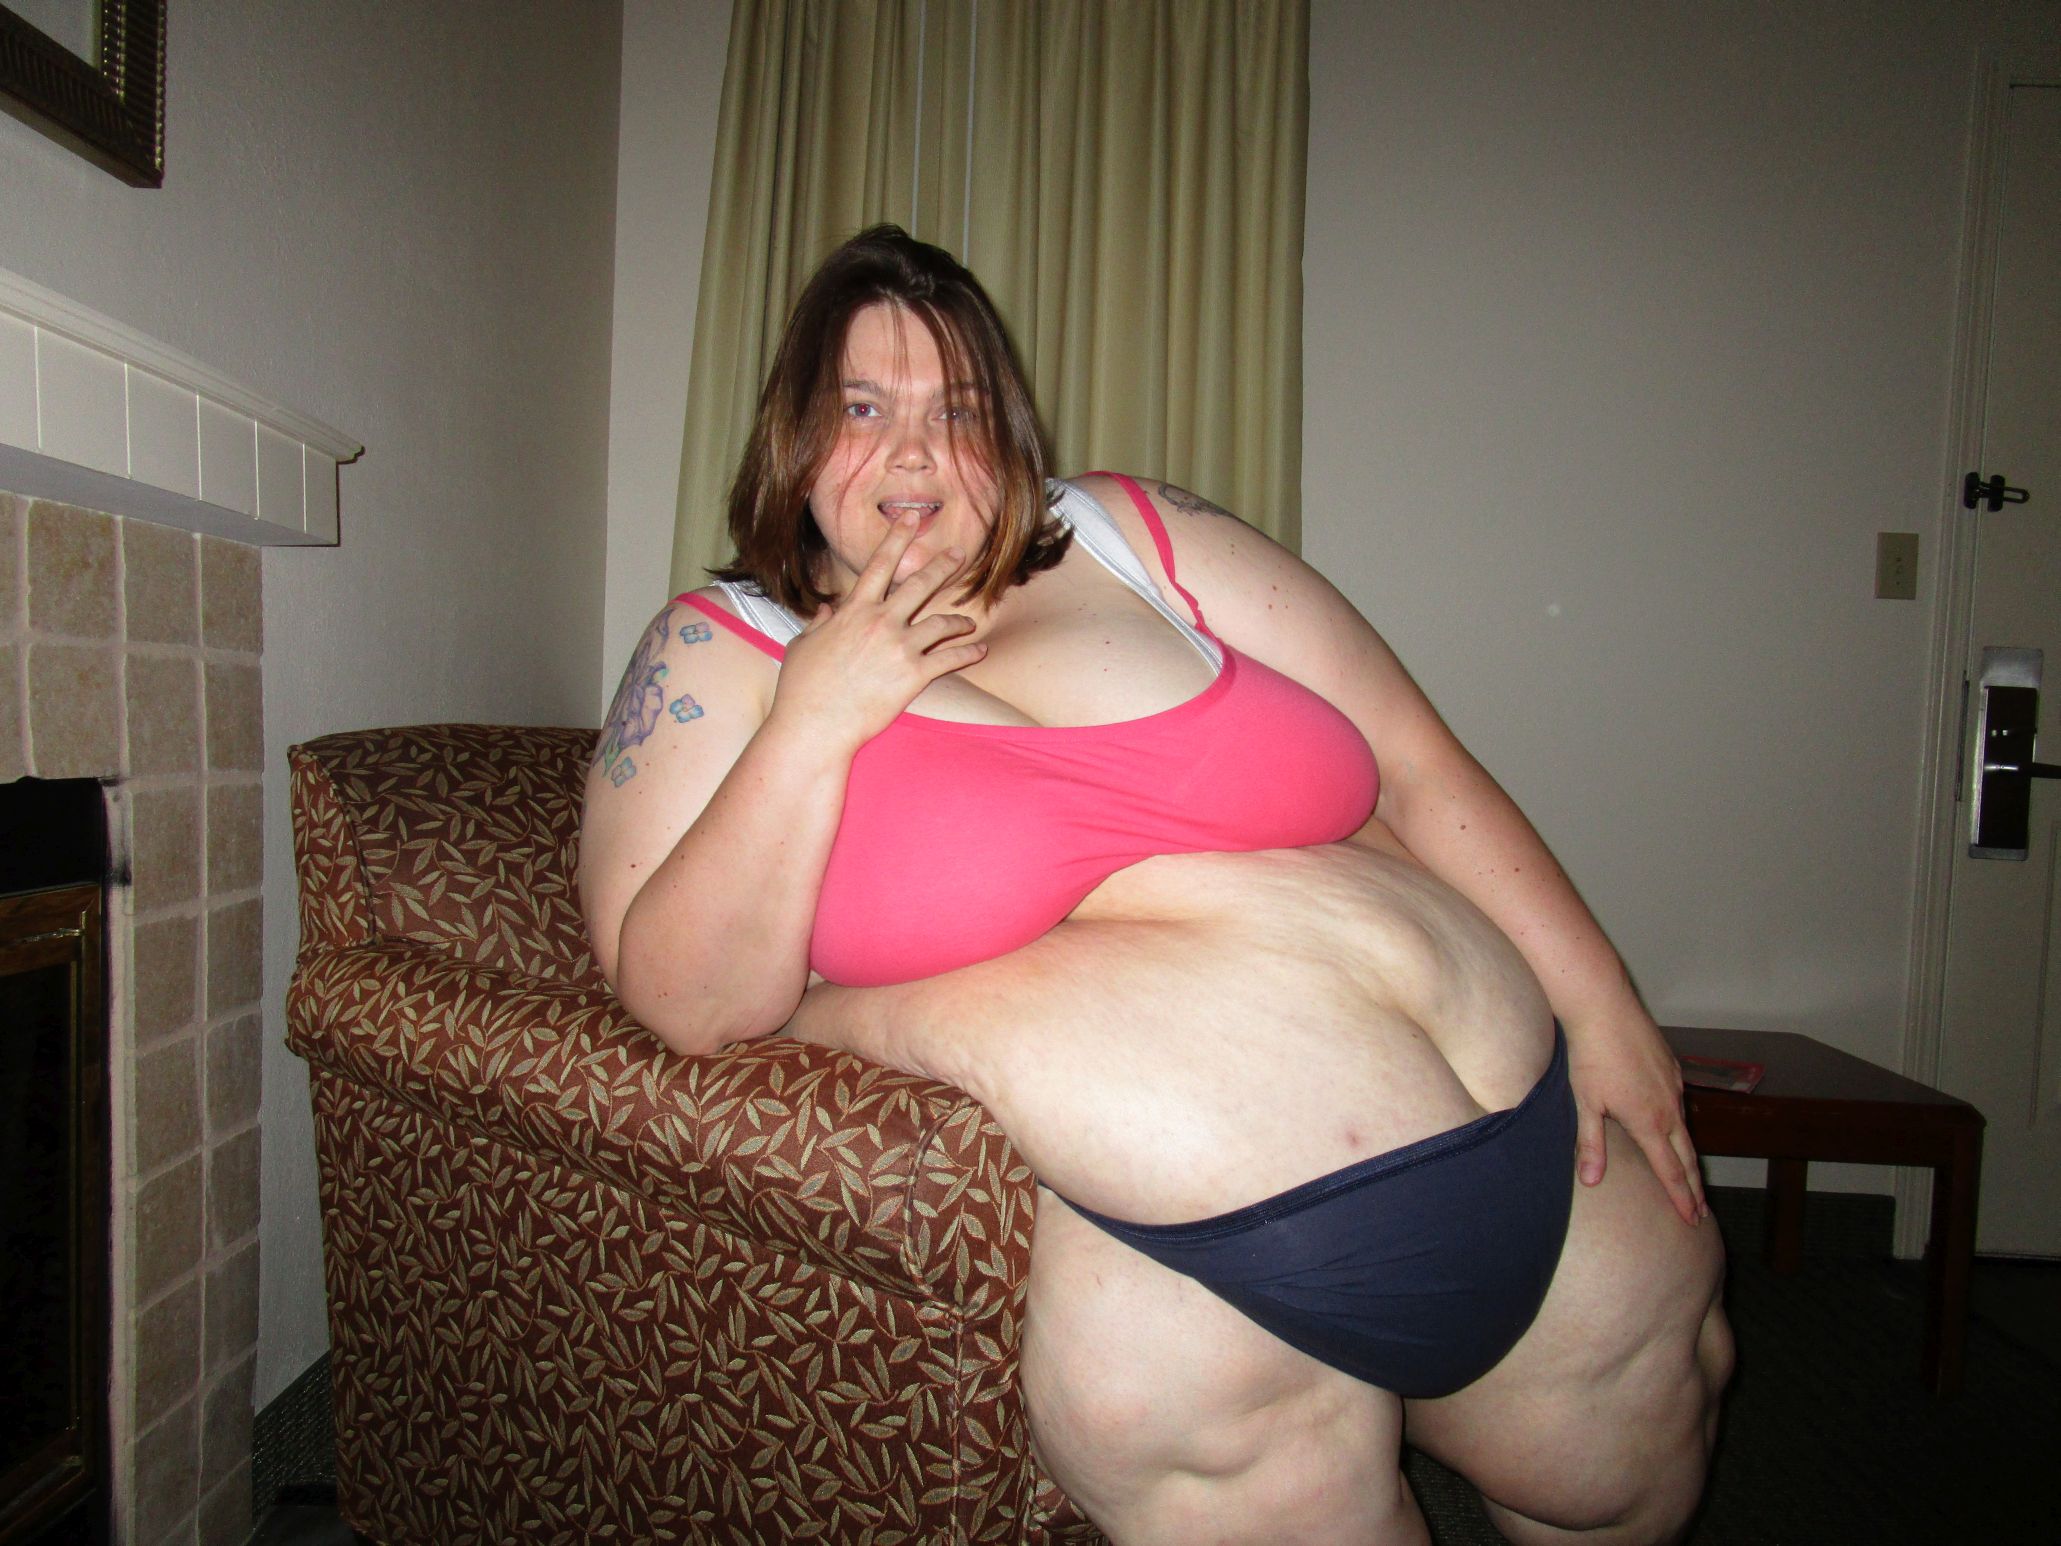 See Kimmy use her beautiful 500lb body to crush guys! 